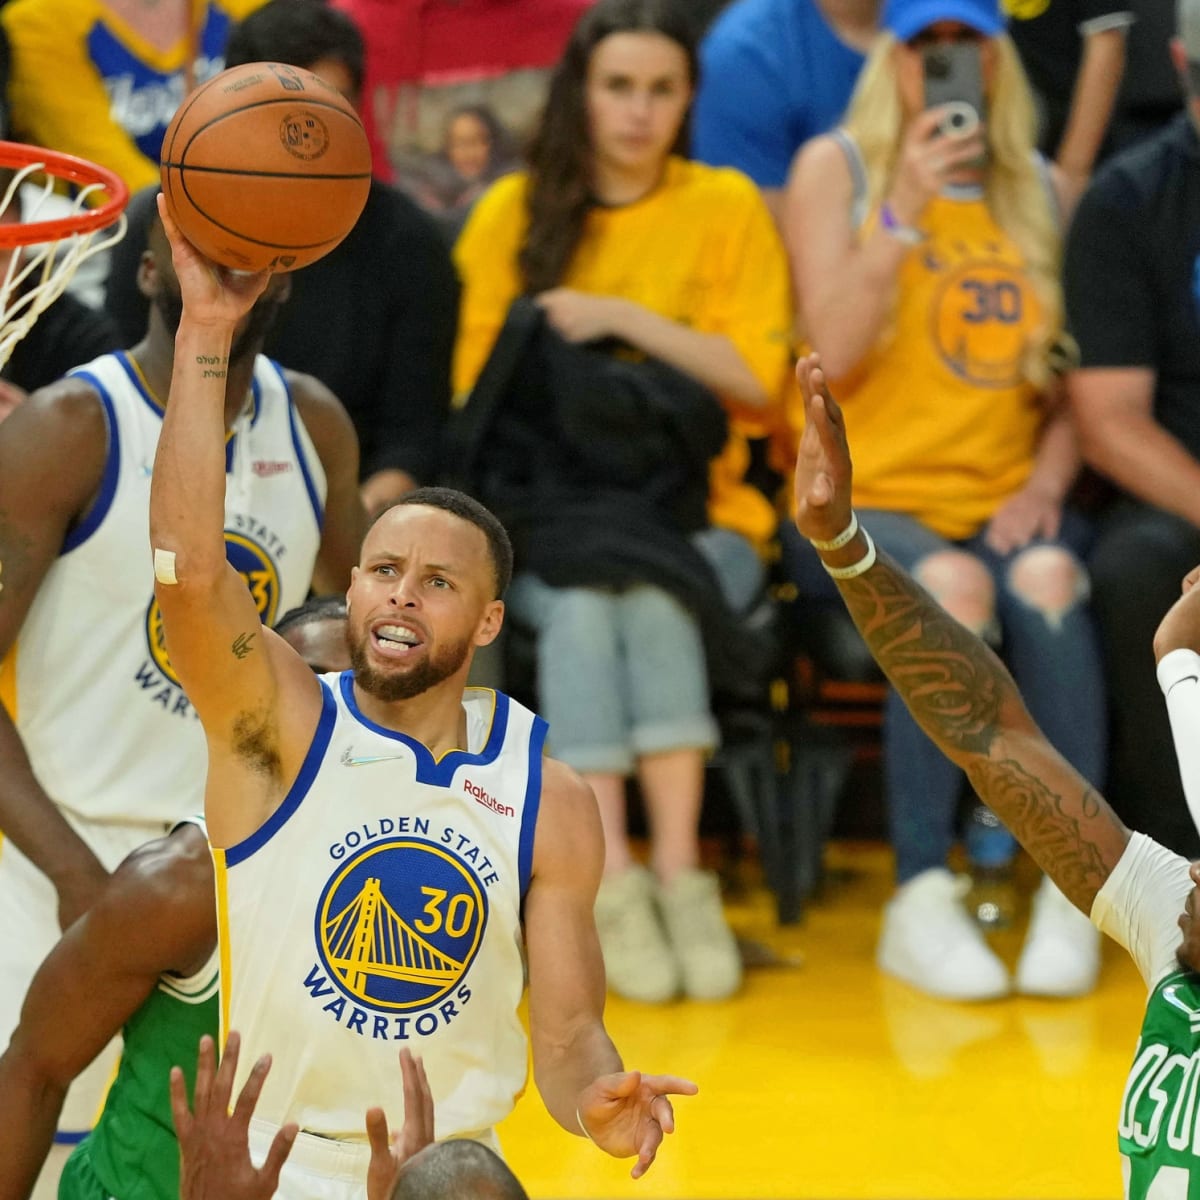 Warriors GM says it's 'conceivable' Curry could play Game 1